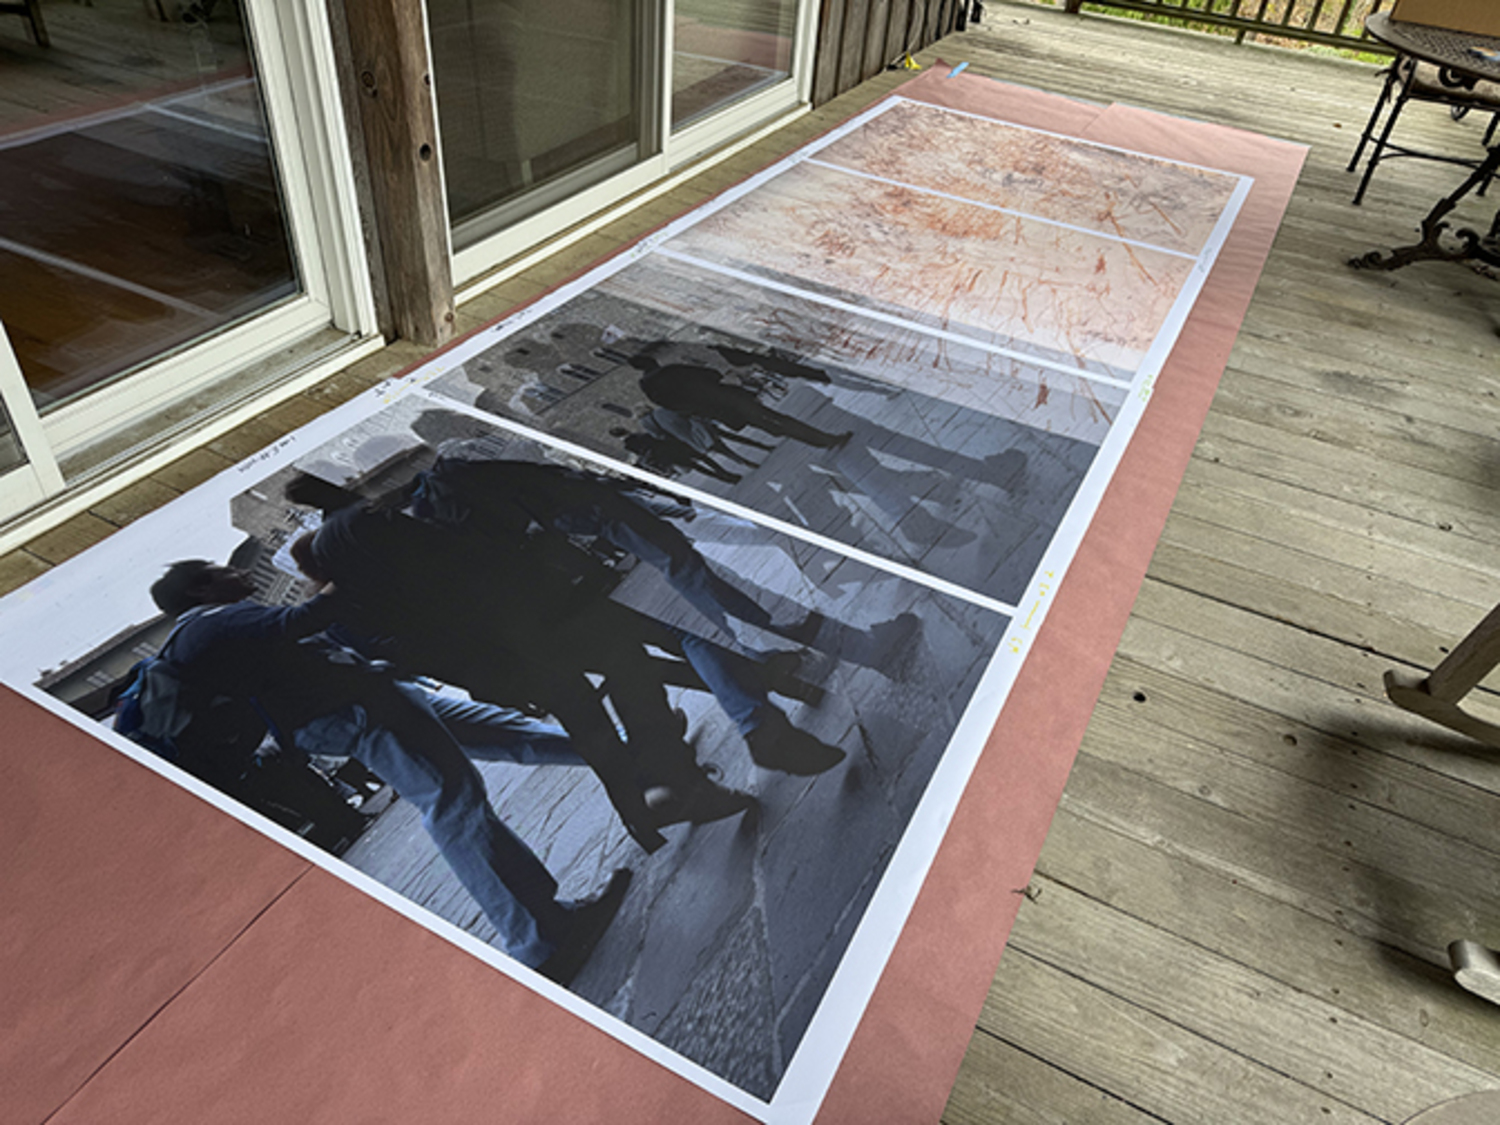 A large scale digital print which Solow prints in sections and then sews together into completed panels. The panels are in an unfinished state and will be transformed into something very different during the residency. COURTESY THE ARTIST